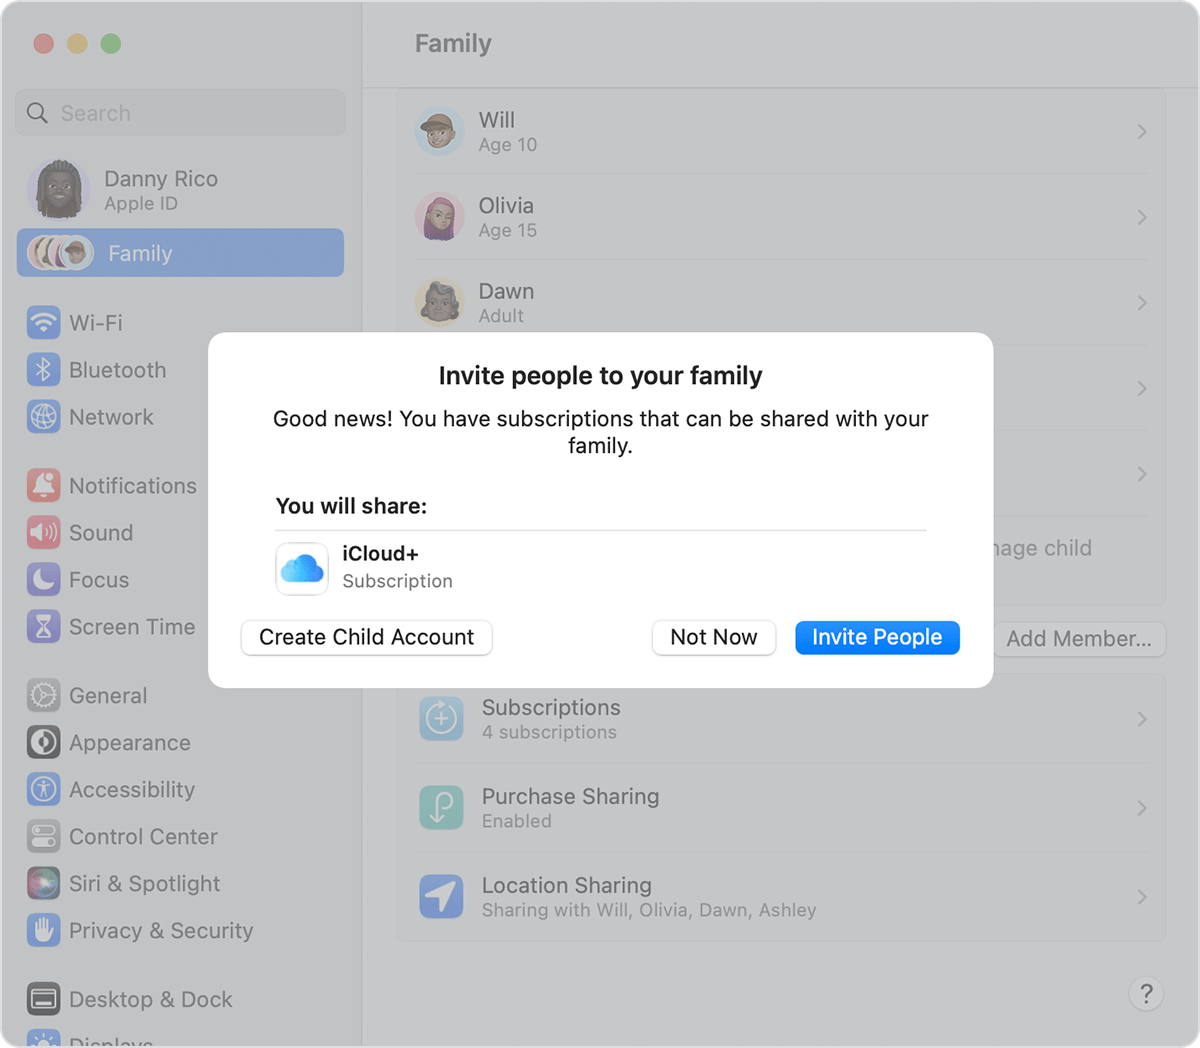 The Create Child Account button is on the left, alongside the Not Now and Invite People buttons.